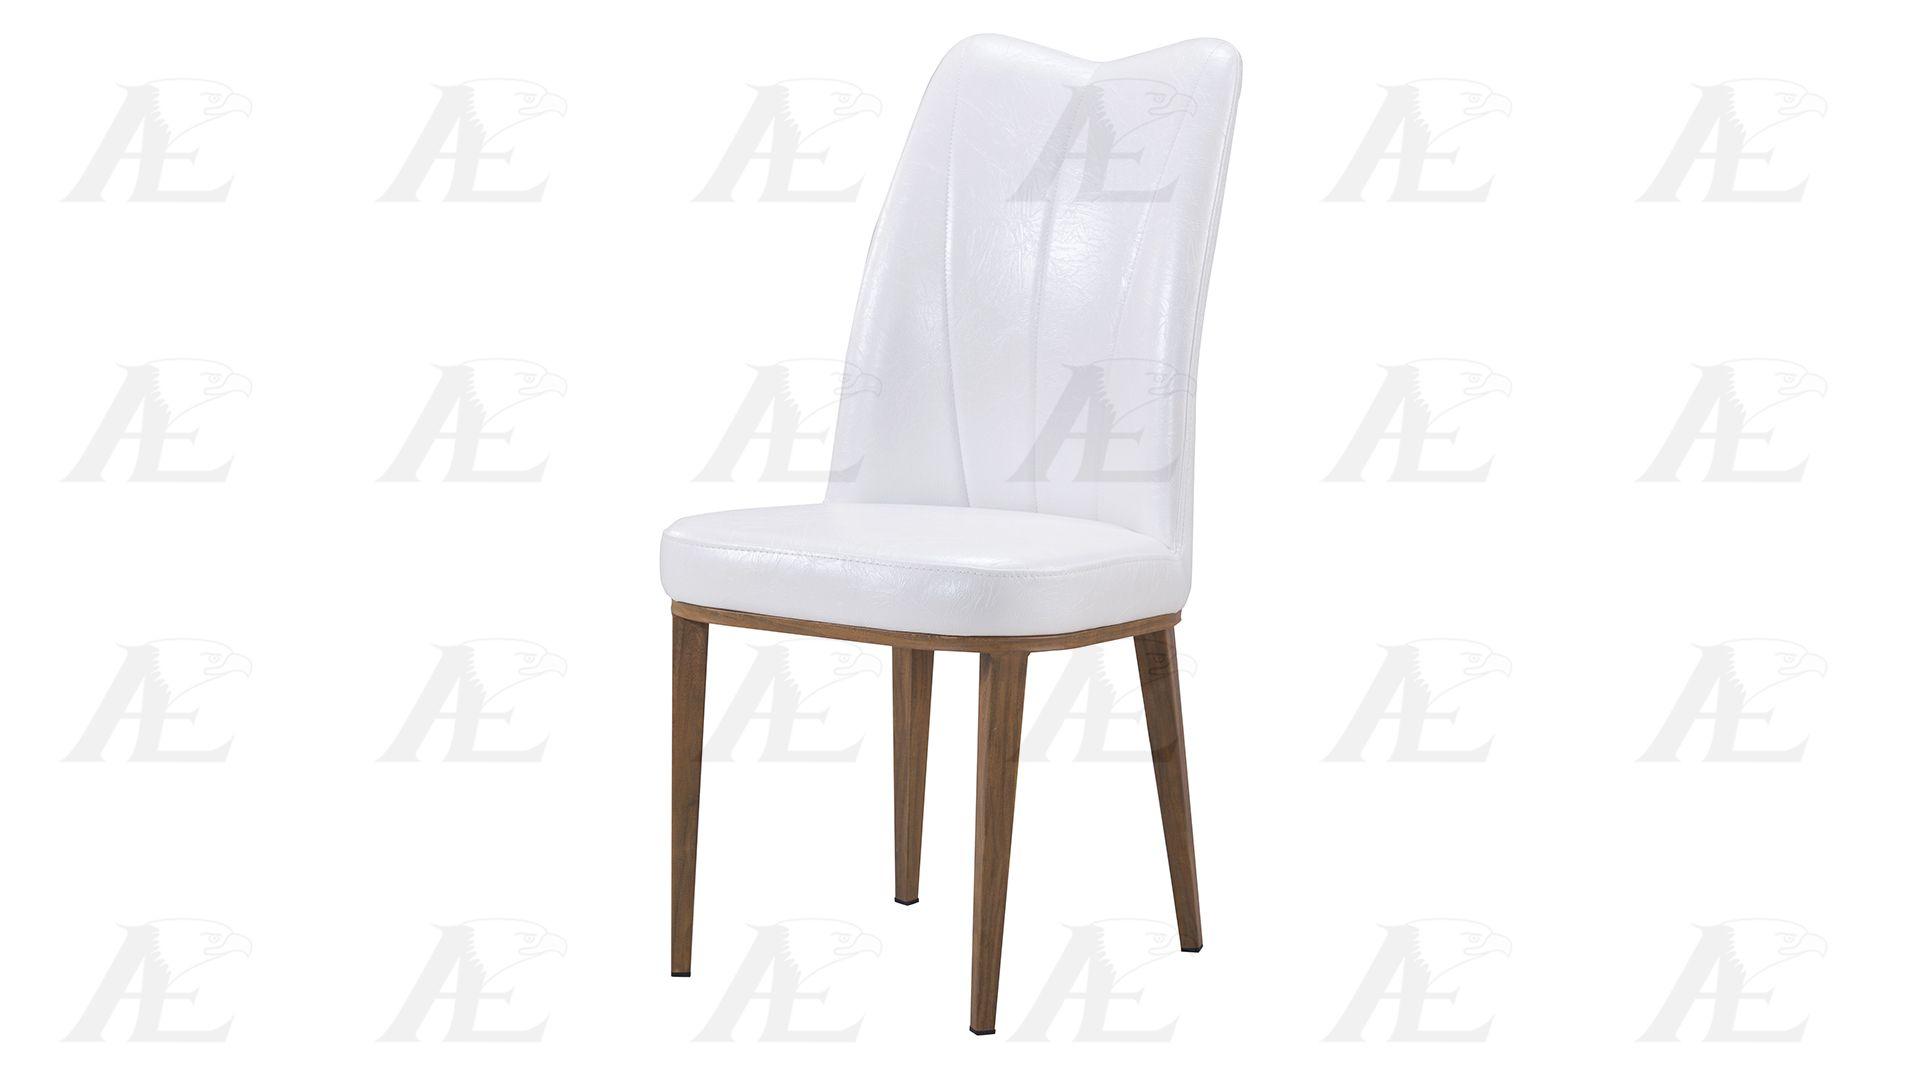 

                    
American Eagle Furniture DT-D519 Dining Sets White PU Purchase 
